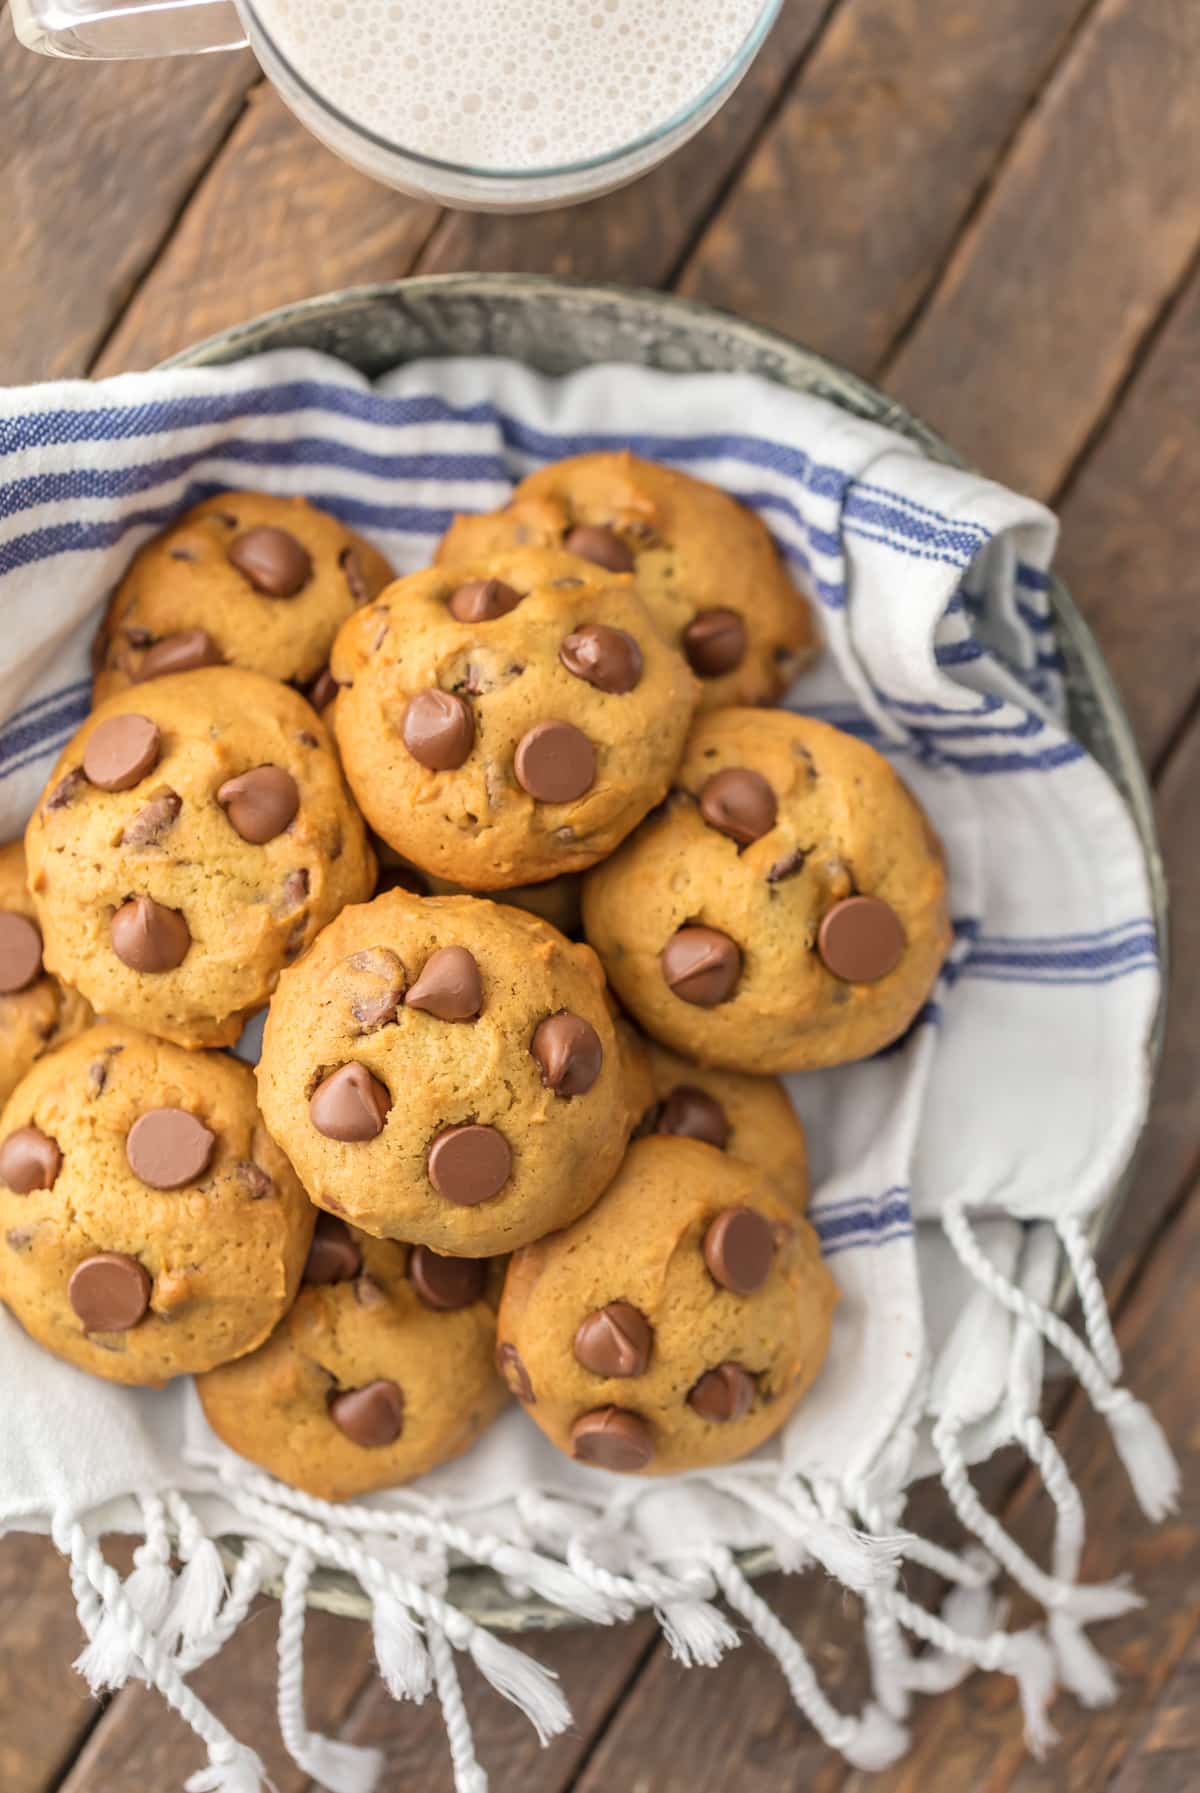 APPLESAUCE CHOCOLATE CHIP COOKIES are the perfect skinny(er) way to enjoy holiday baking! These soft chocolate chip cookies are loaded with chocolate and made with applesauce! Amazing flavor, less calories, and you can eat the dough with no worries!